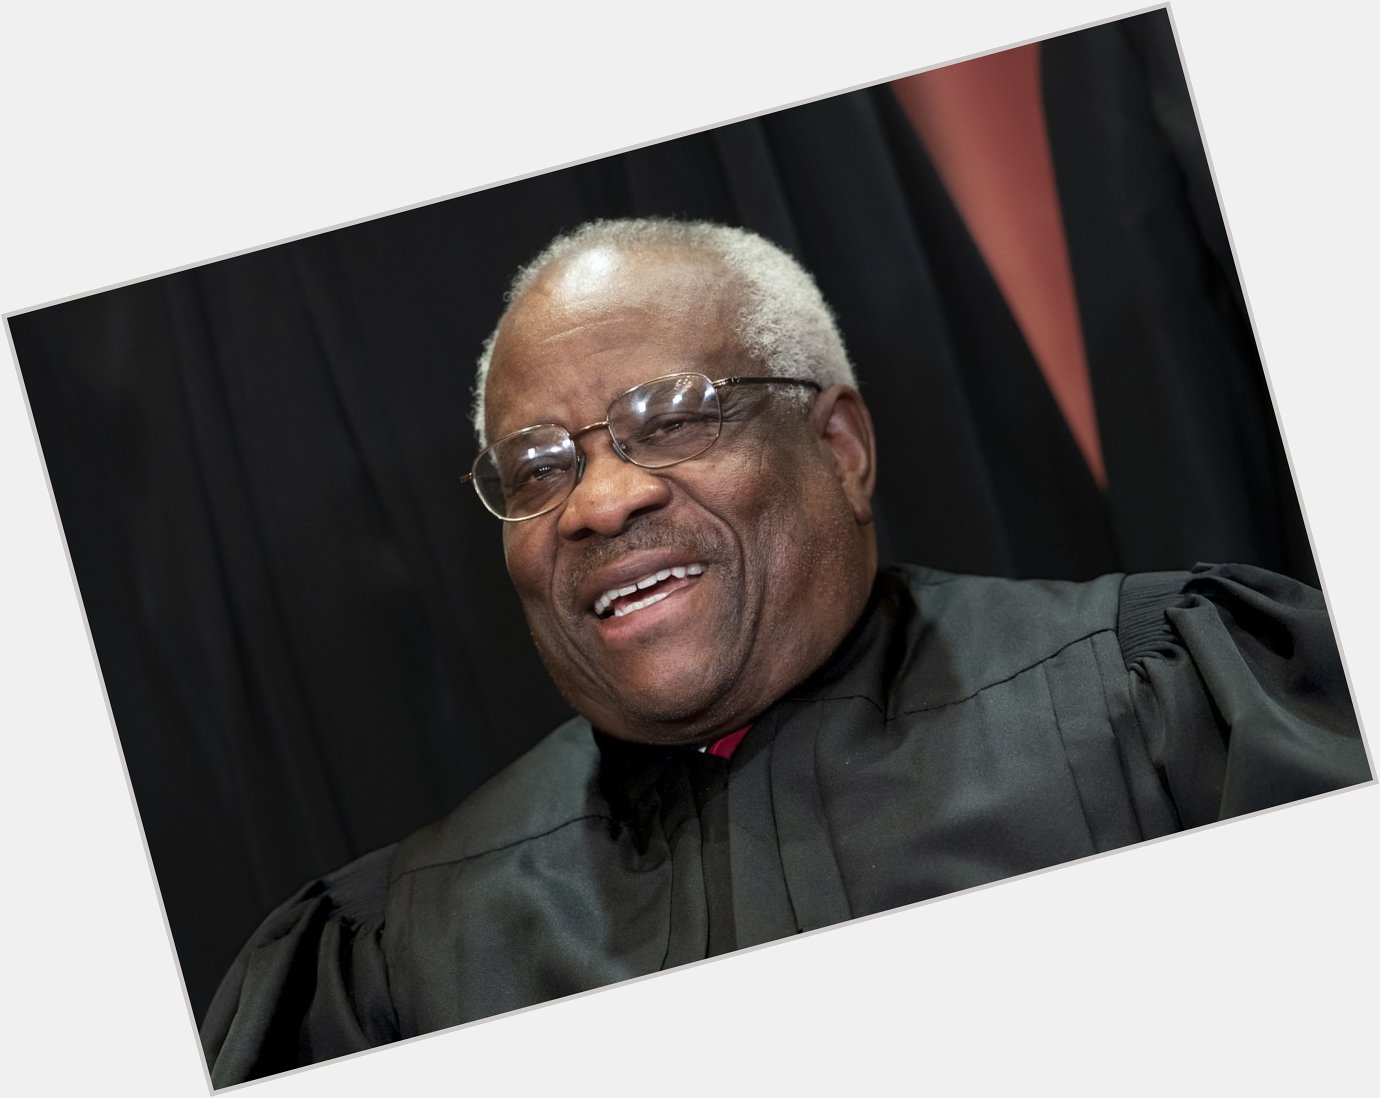 CRPA wishes Justice Clarence Thomas a very happy 74th birthday! 